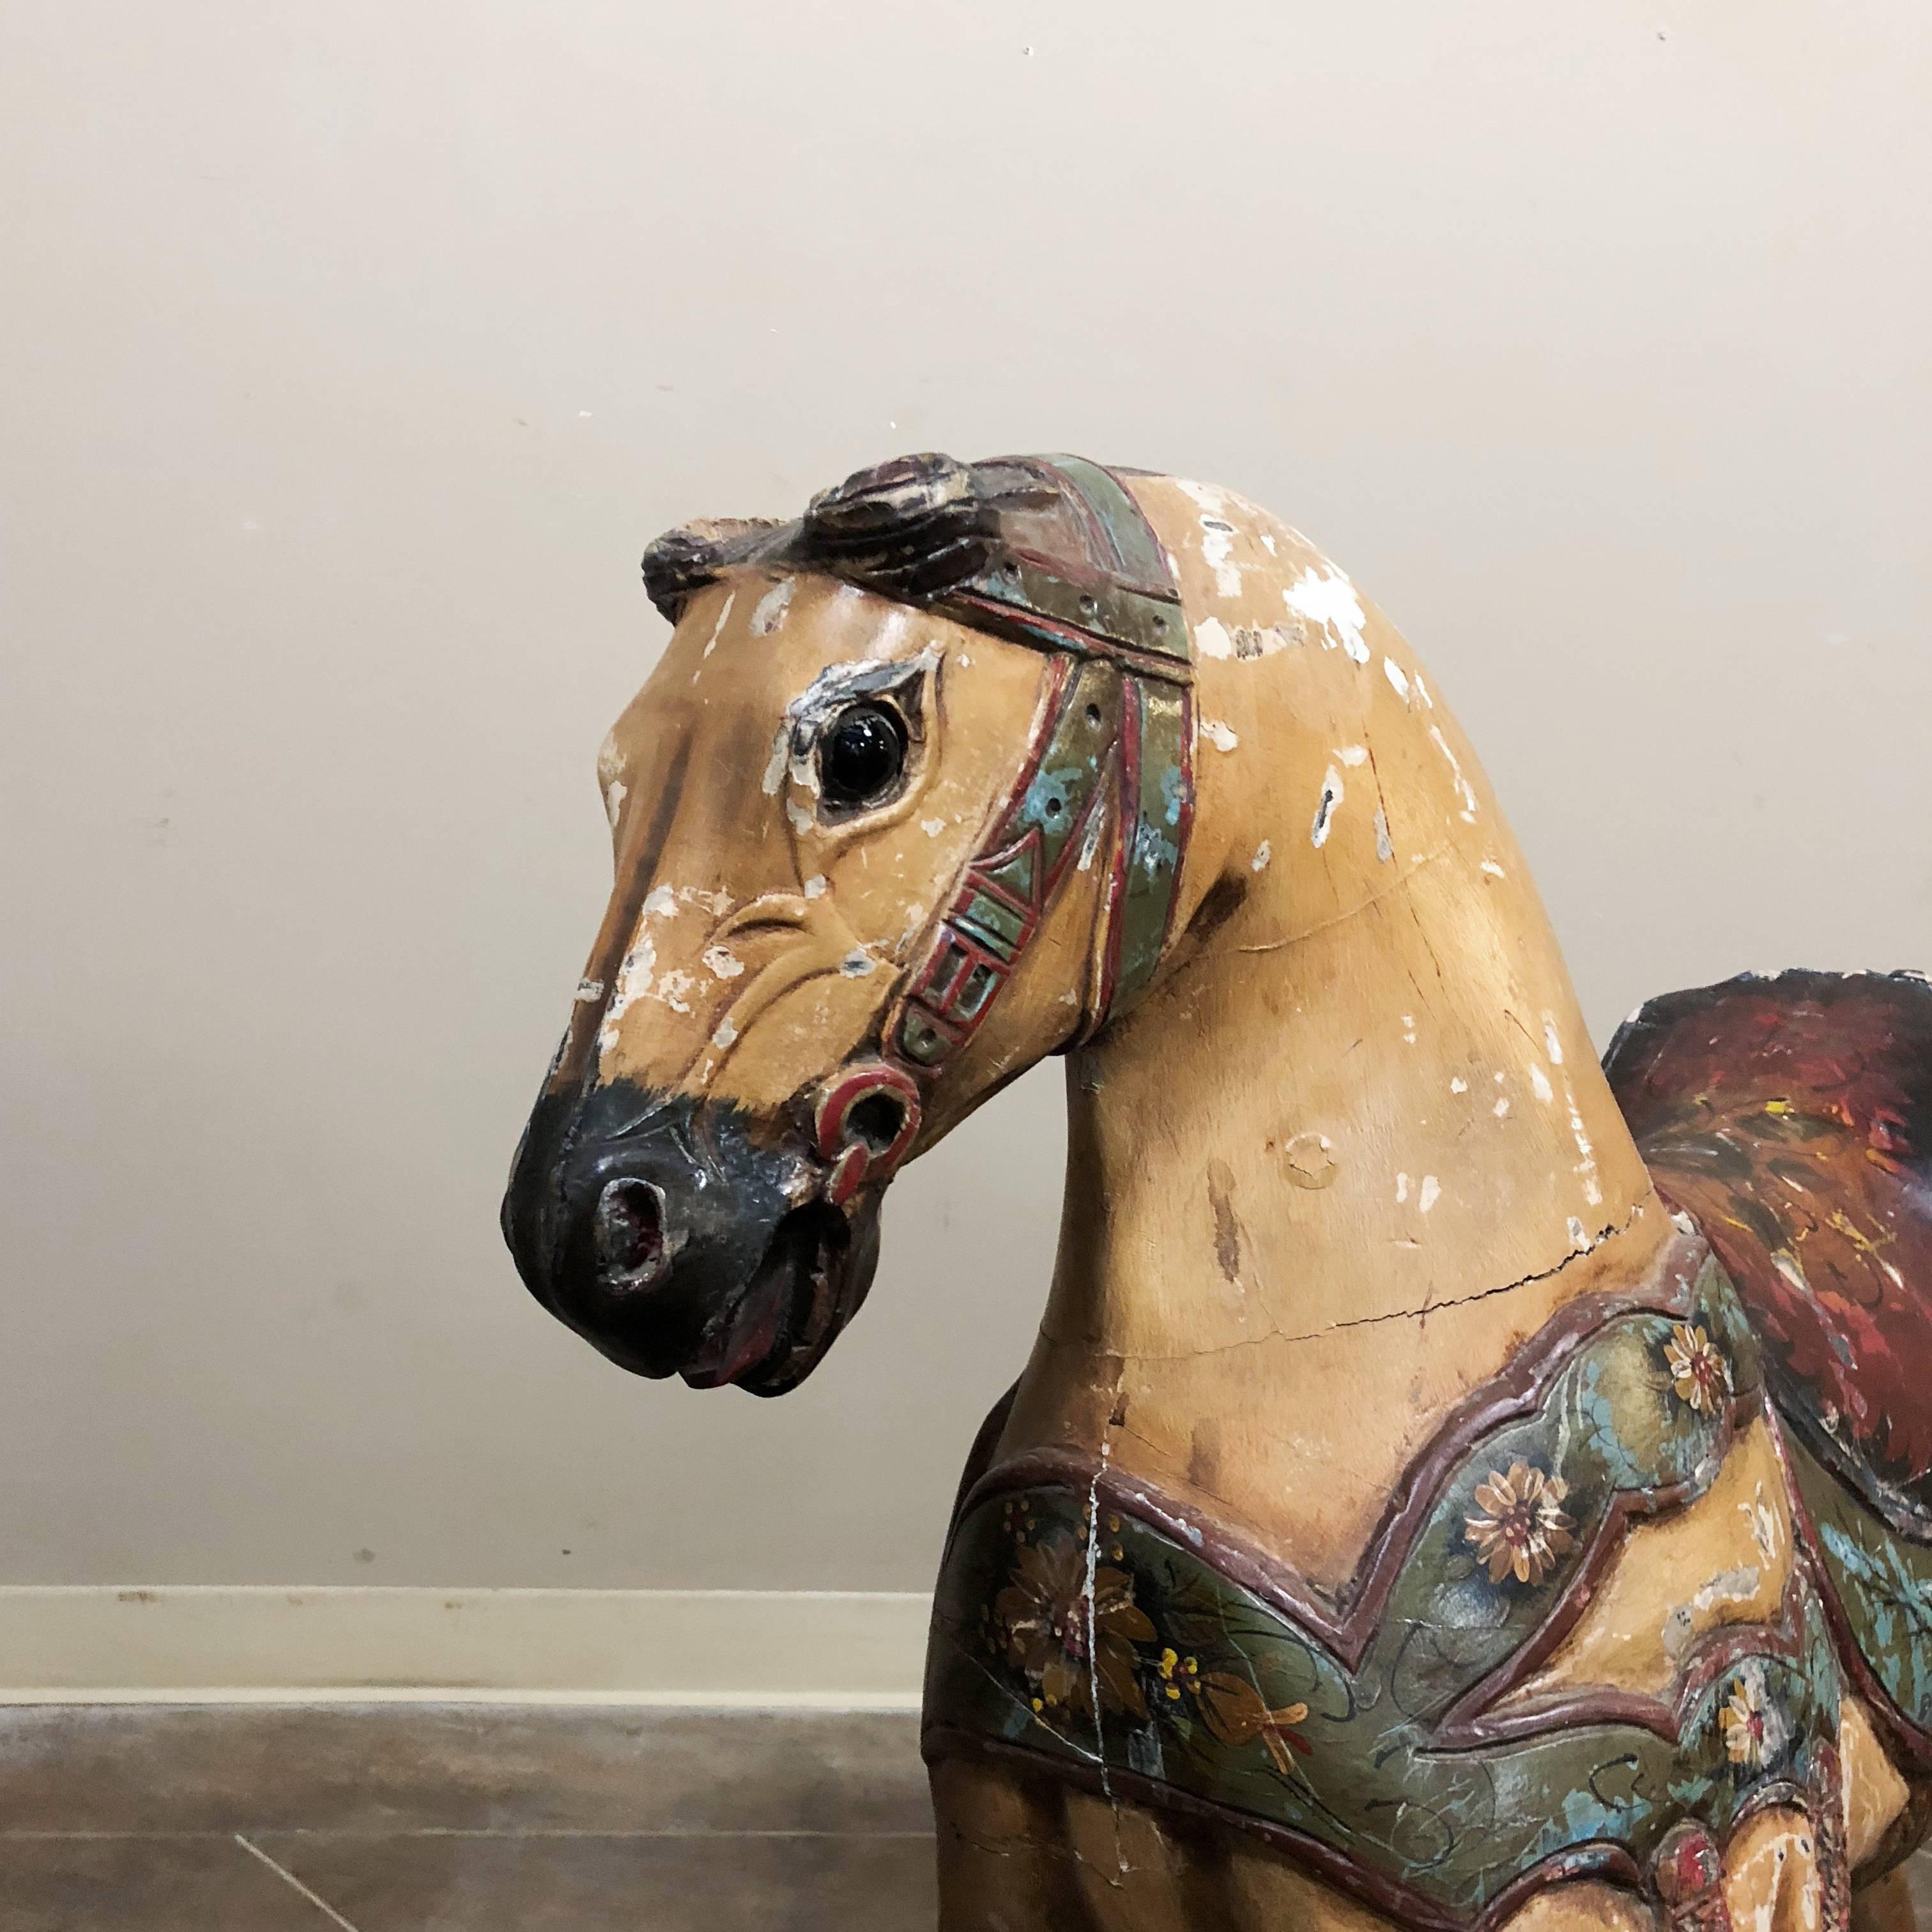 Vintage hand-painted Carousel horse is a remarkable reminder of a bygone era, when travelling carnivals enthralled rural populaces with dazzling lights, mechanized rides and a fascinating source of imagination! This example is a splendid rendition